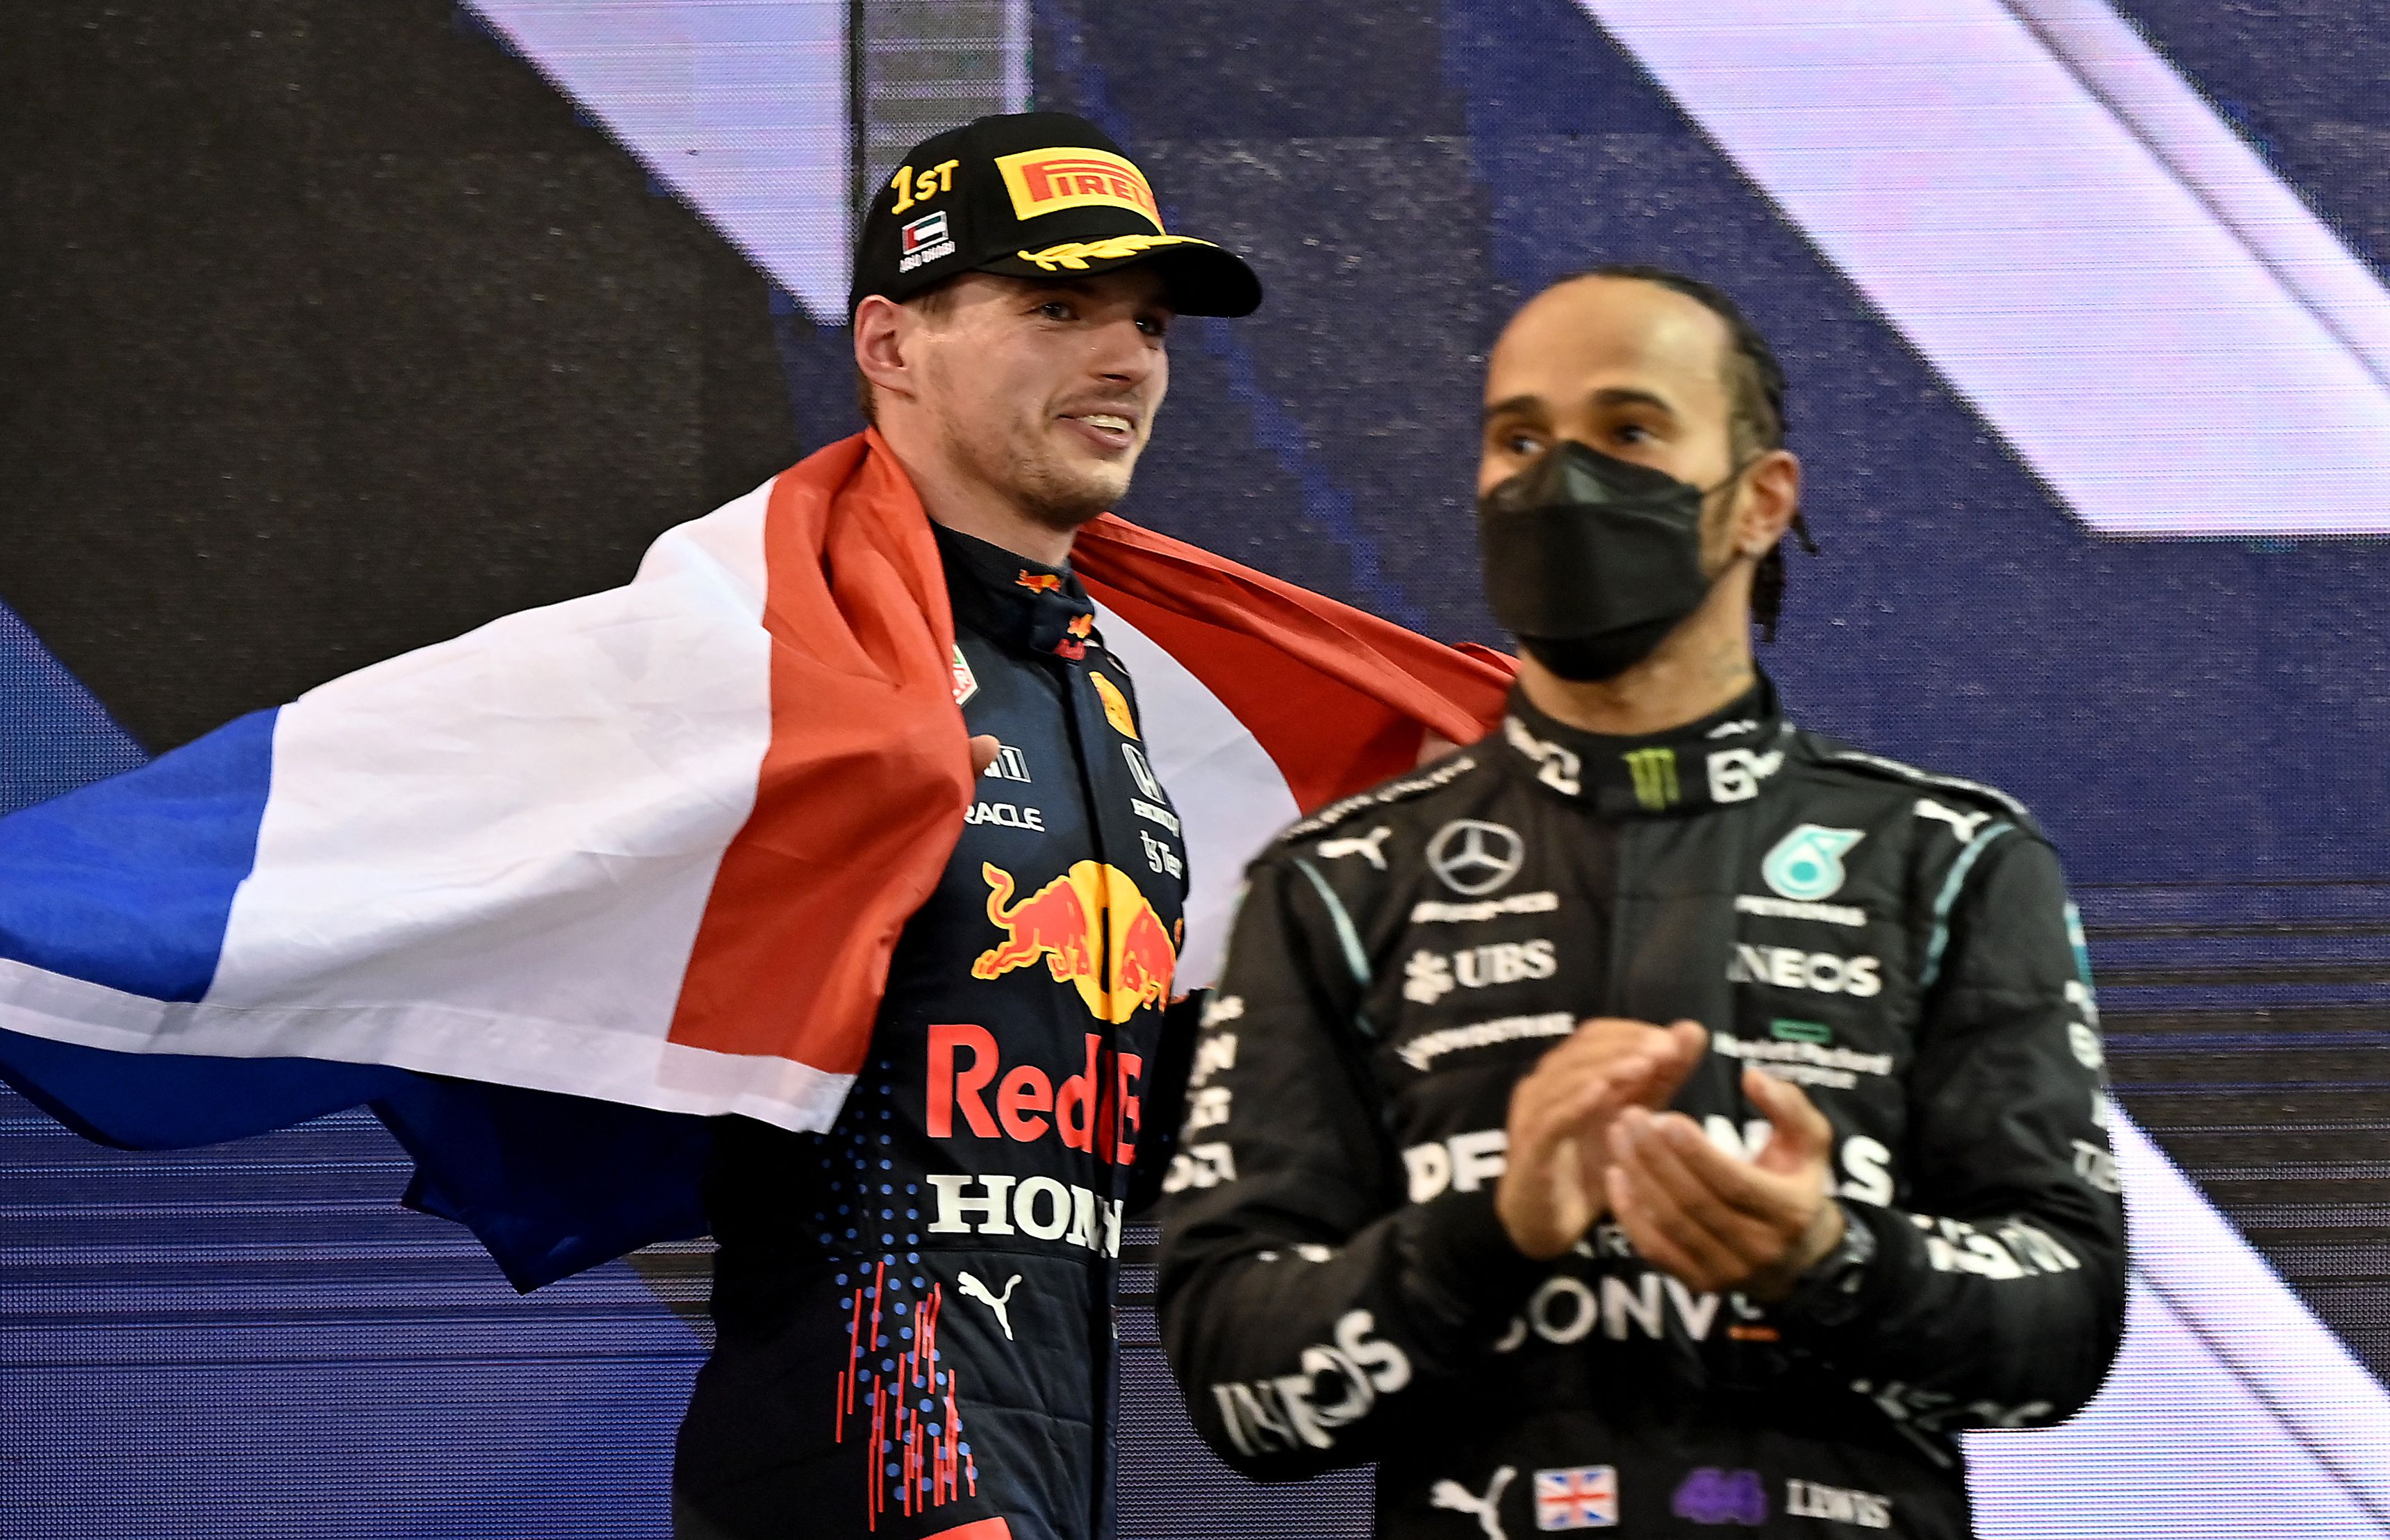 F1 Abu Dhabi Grand Prix 2021 as it happened: Mercedes to lodge formal  appeal with initial protests rejected after Max Verstappen wins world  championship in controversial fashion to deny Lewis Hamilton